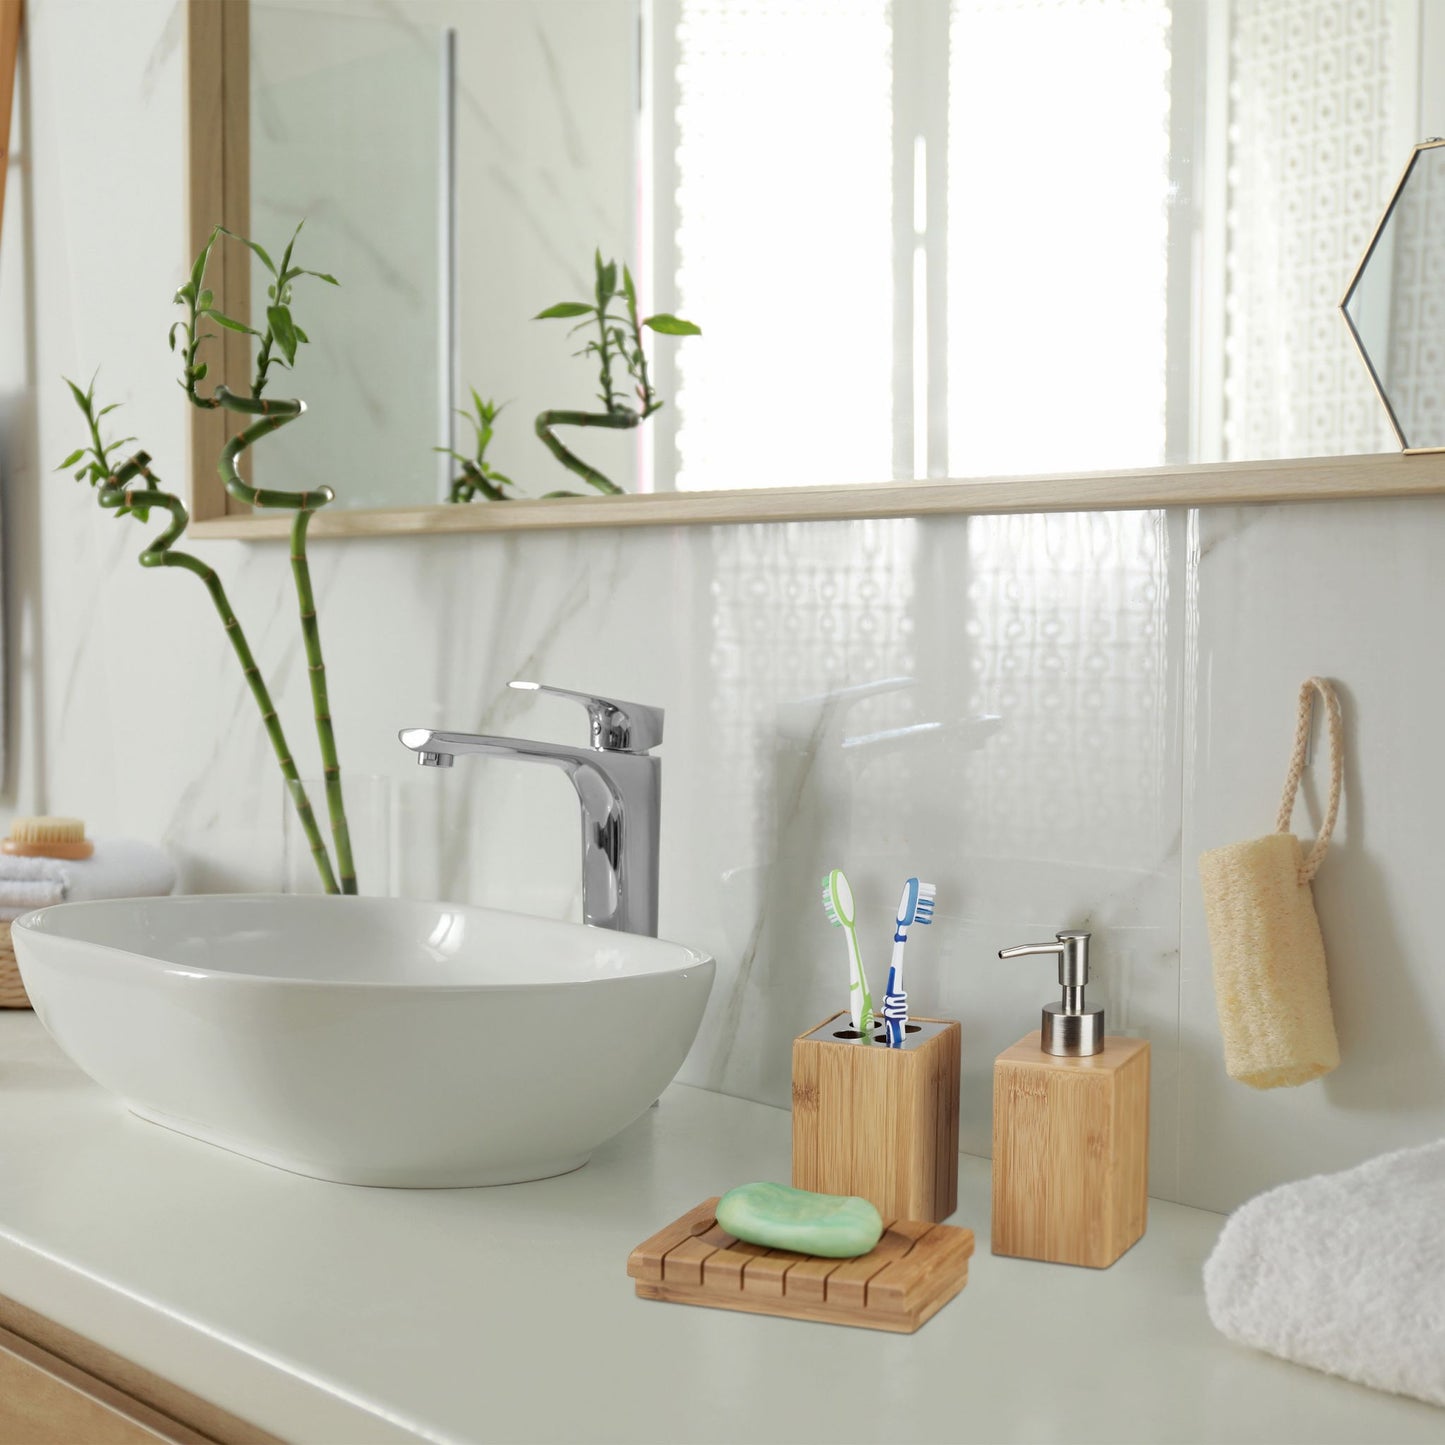 RelaxDays Bamboo Bathroom Accessories Set of 3 in Category Bamboo Bathroom Accessories by Bamboo Bathrooms